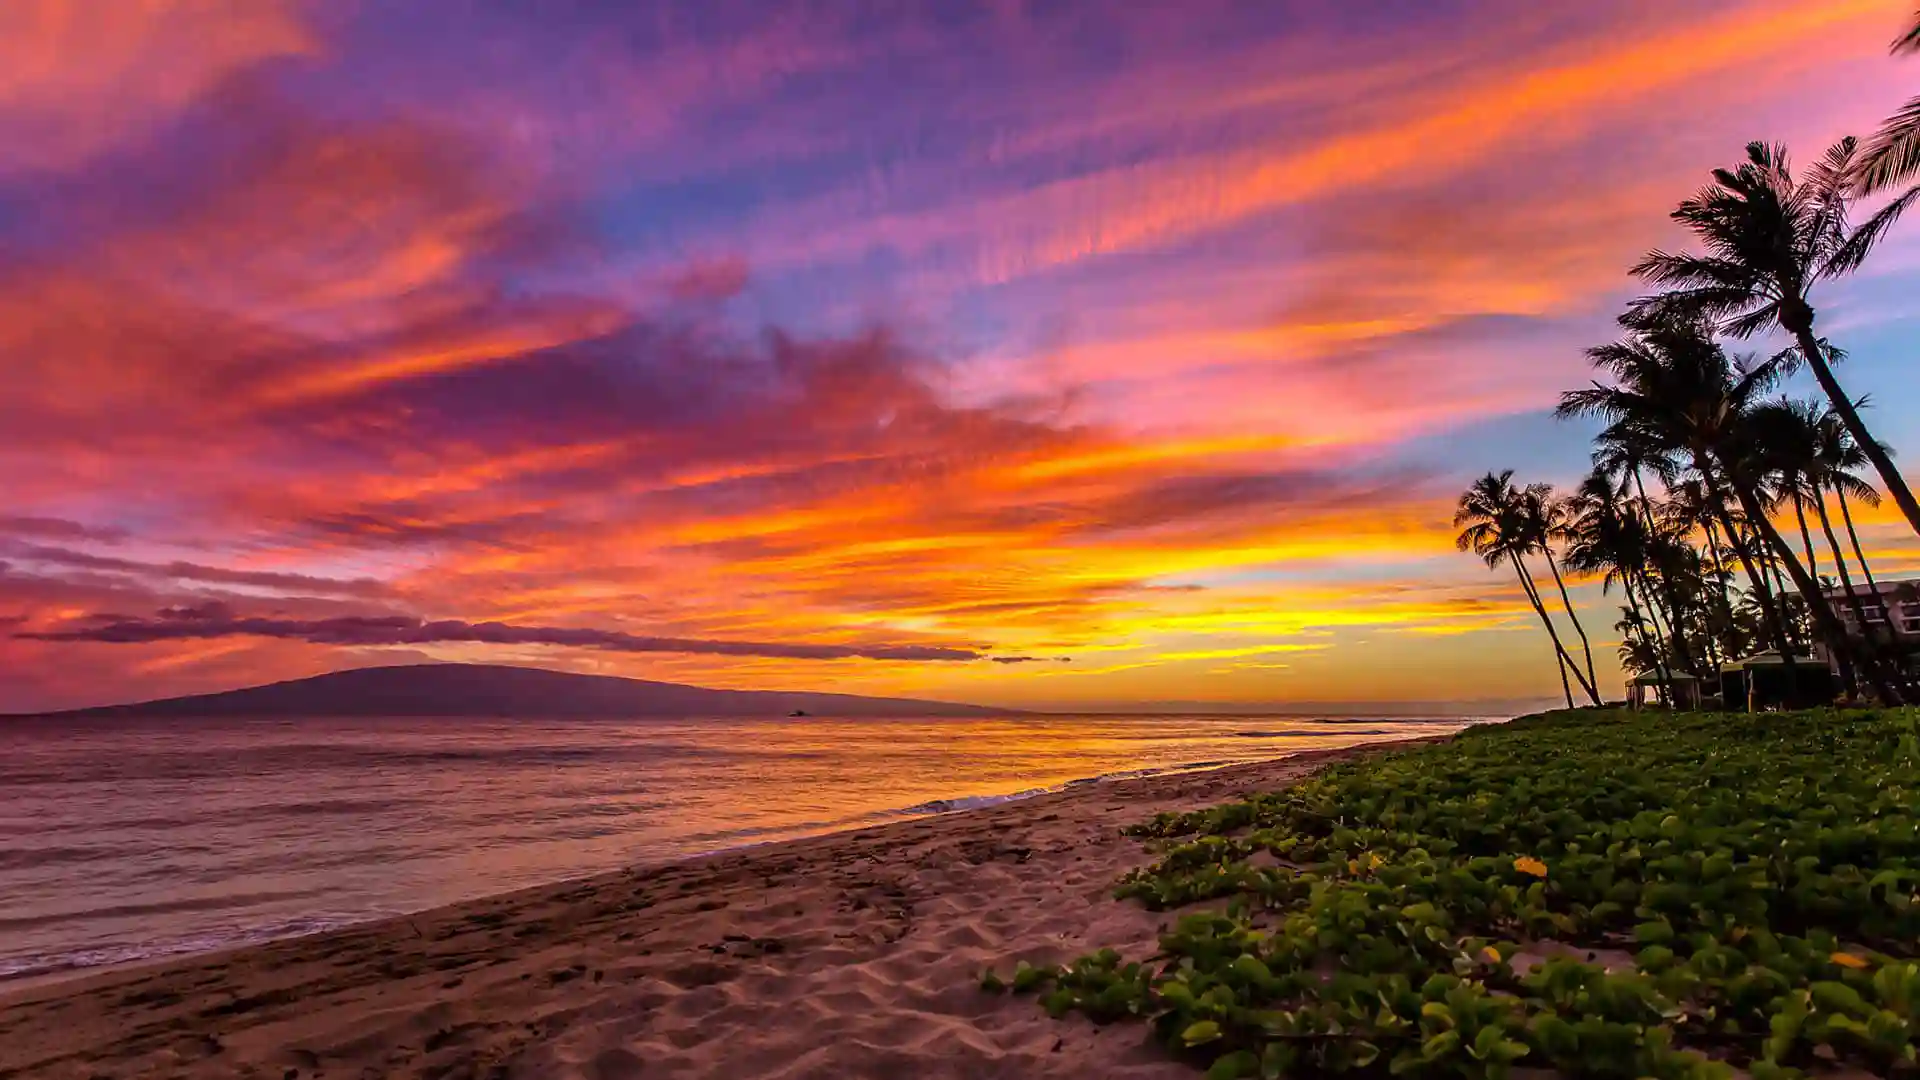 View of sunset on beach in Hawaii.